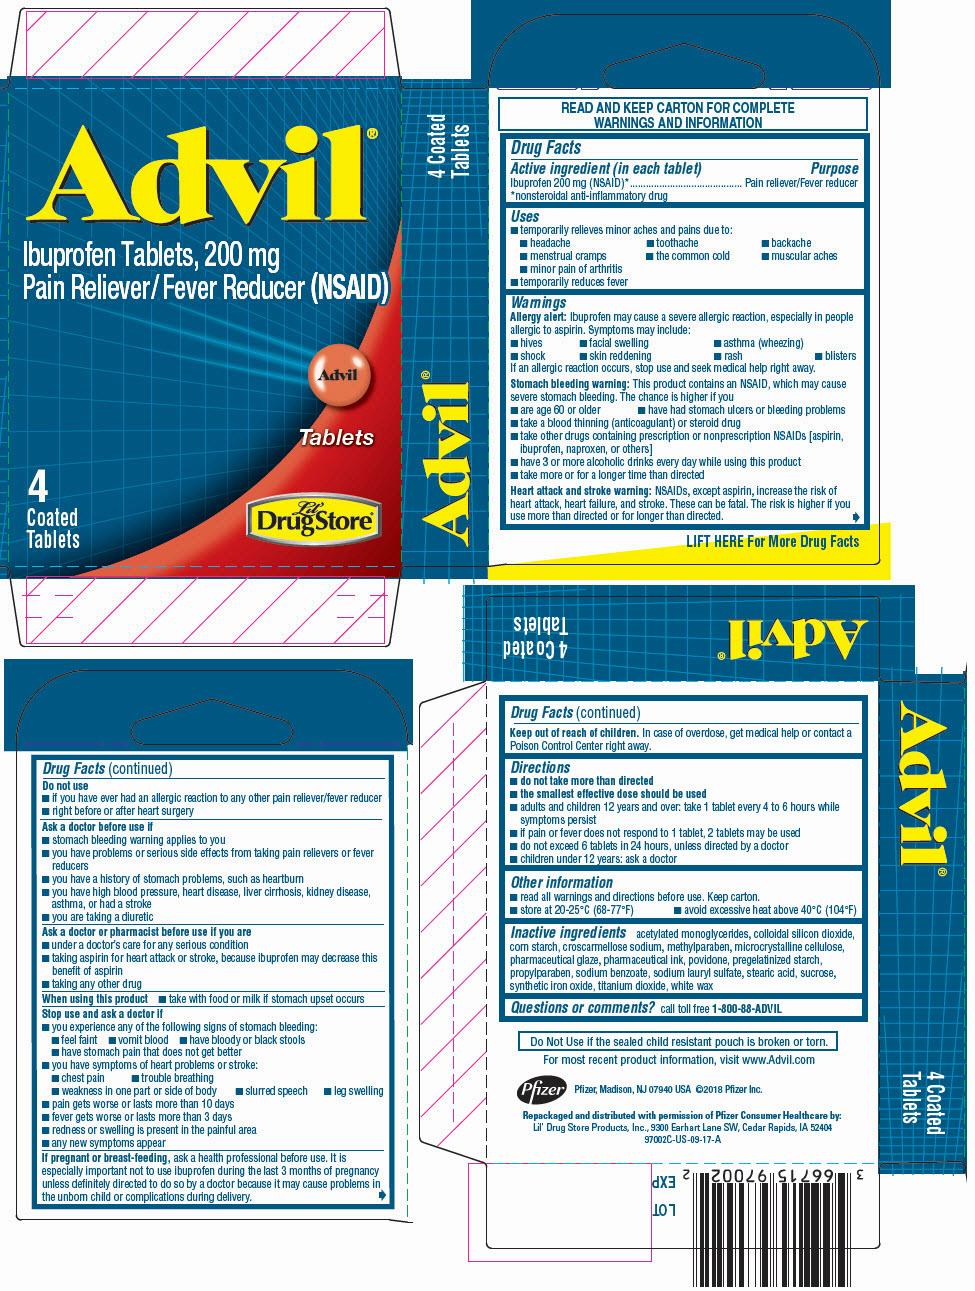 A box of Advil pain relievers, containing 4 coated tablets of 200mg each.